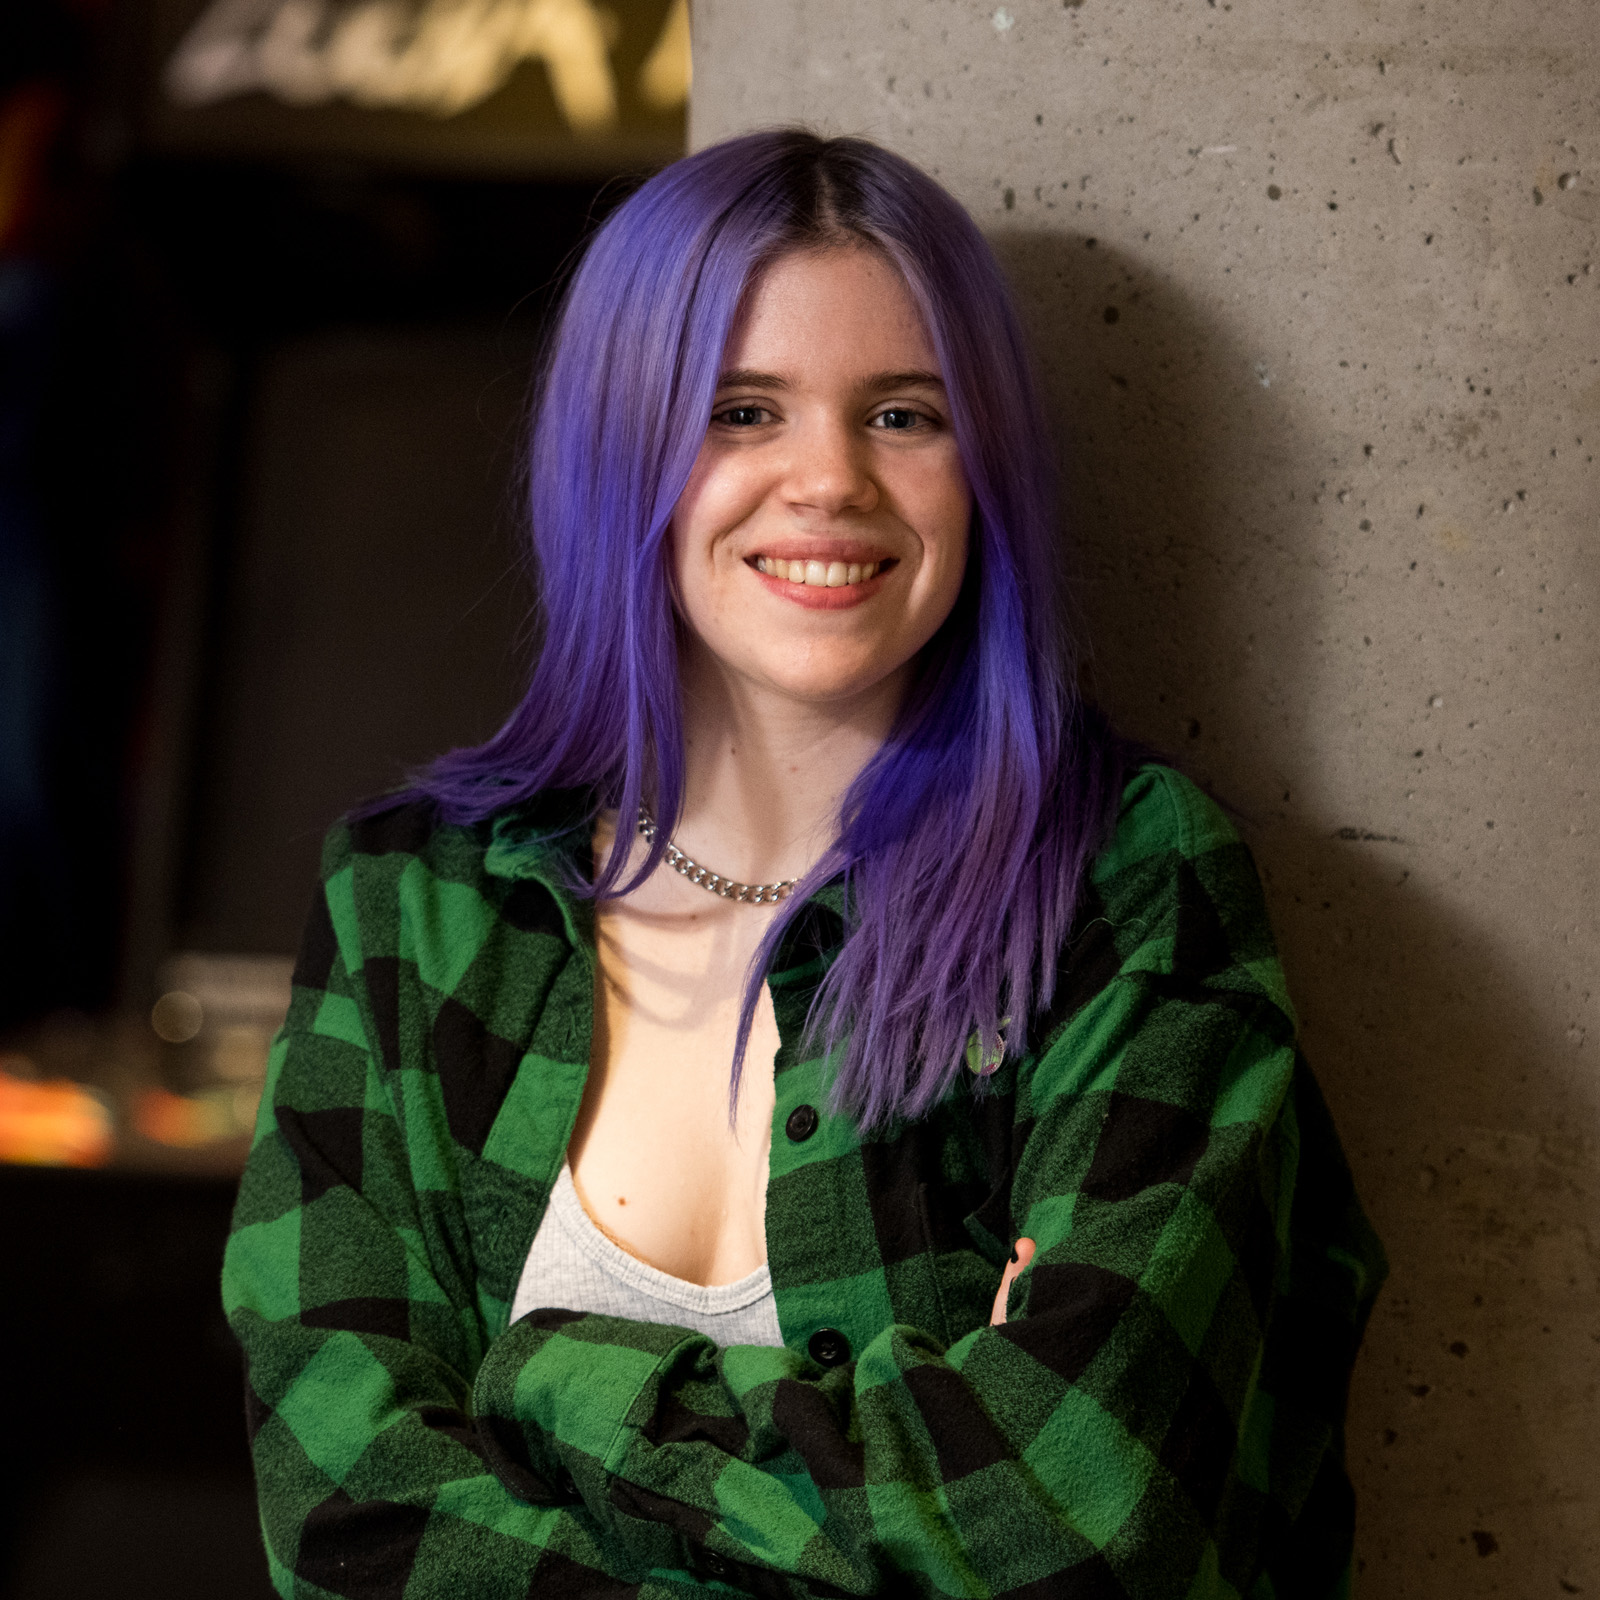 student with long purple hair smiling at camera